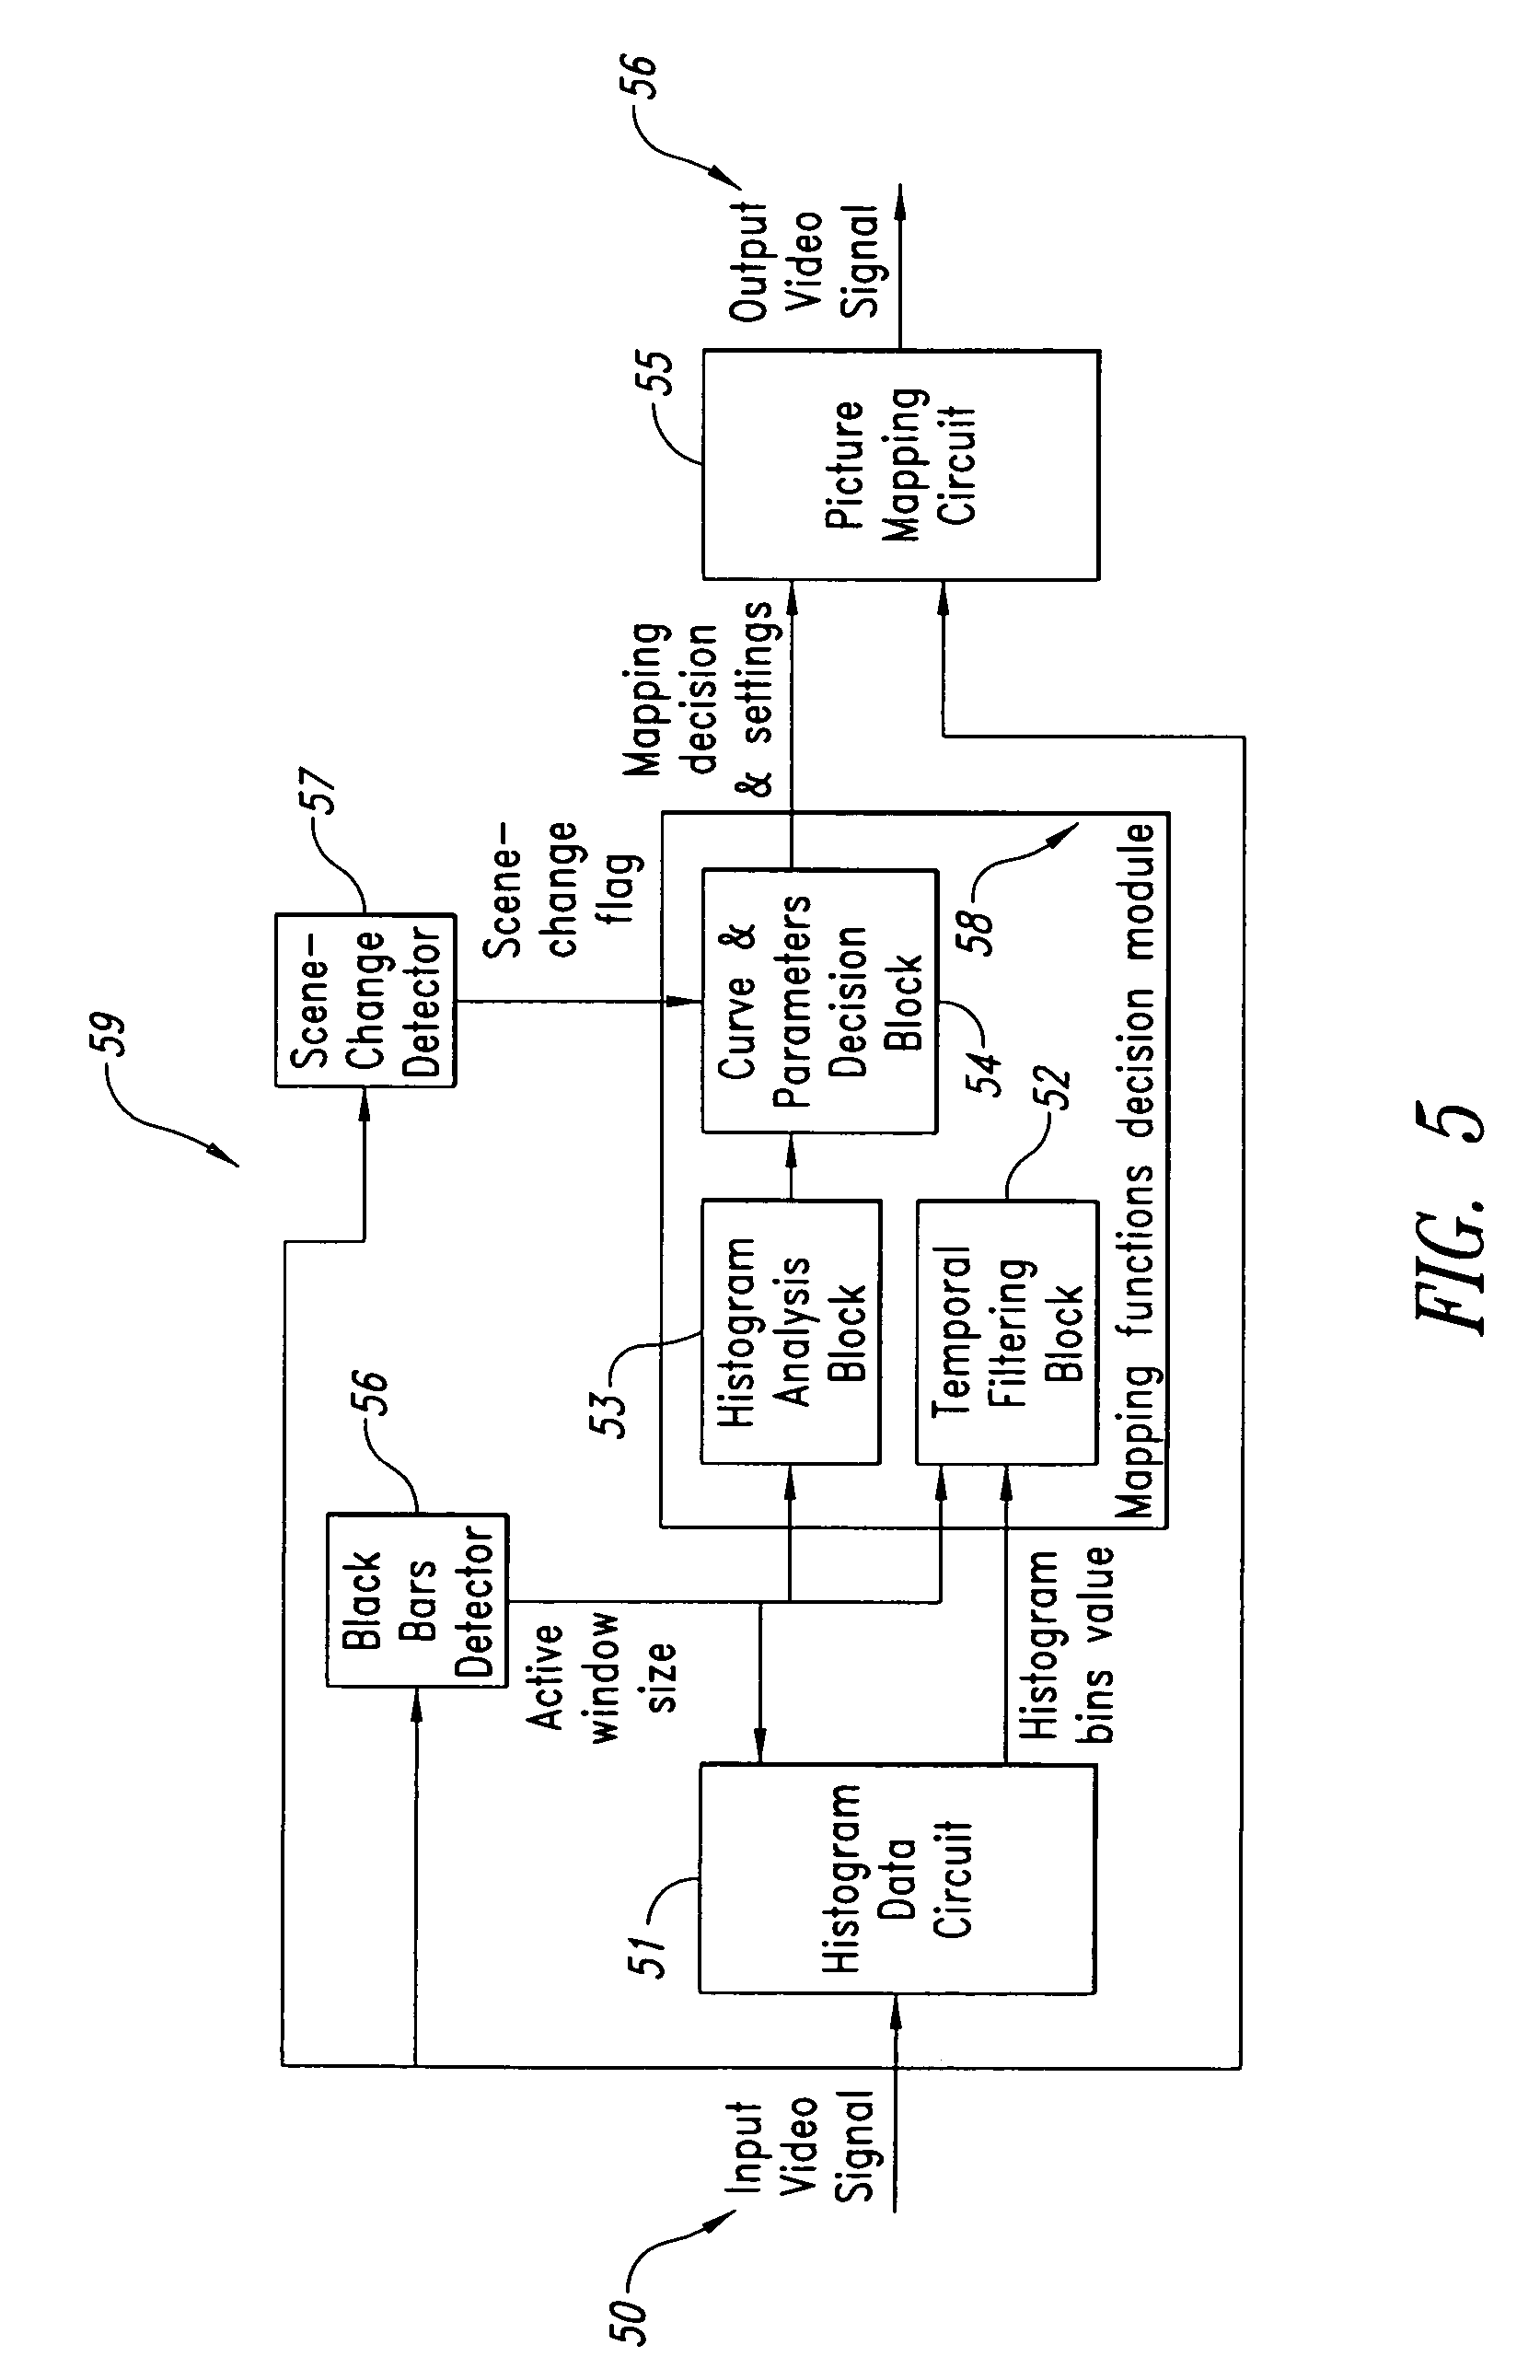 Method and system for contrast enhancement of digital video